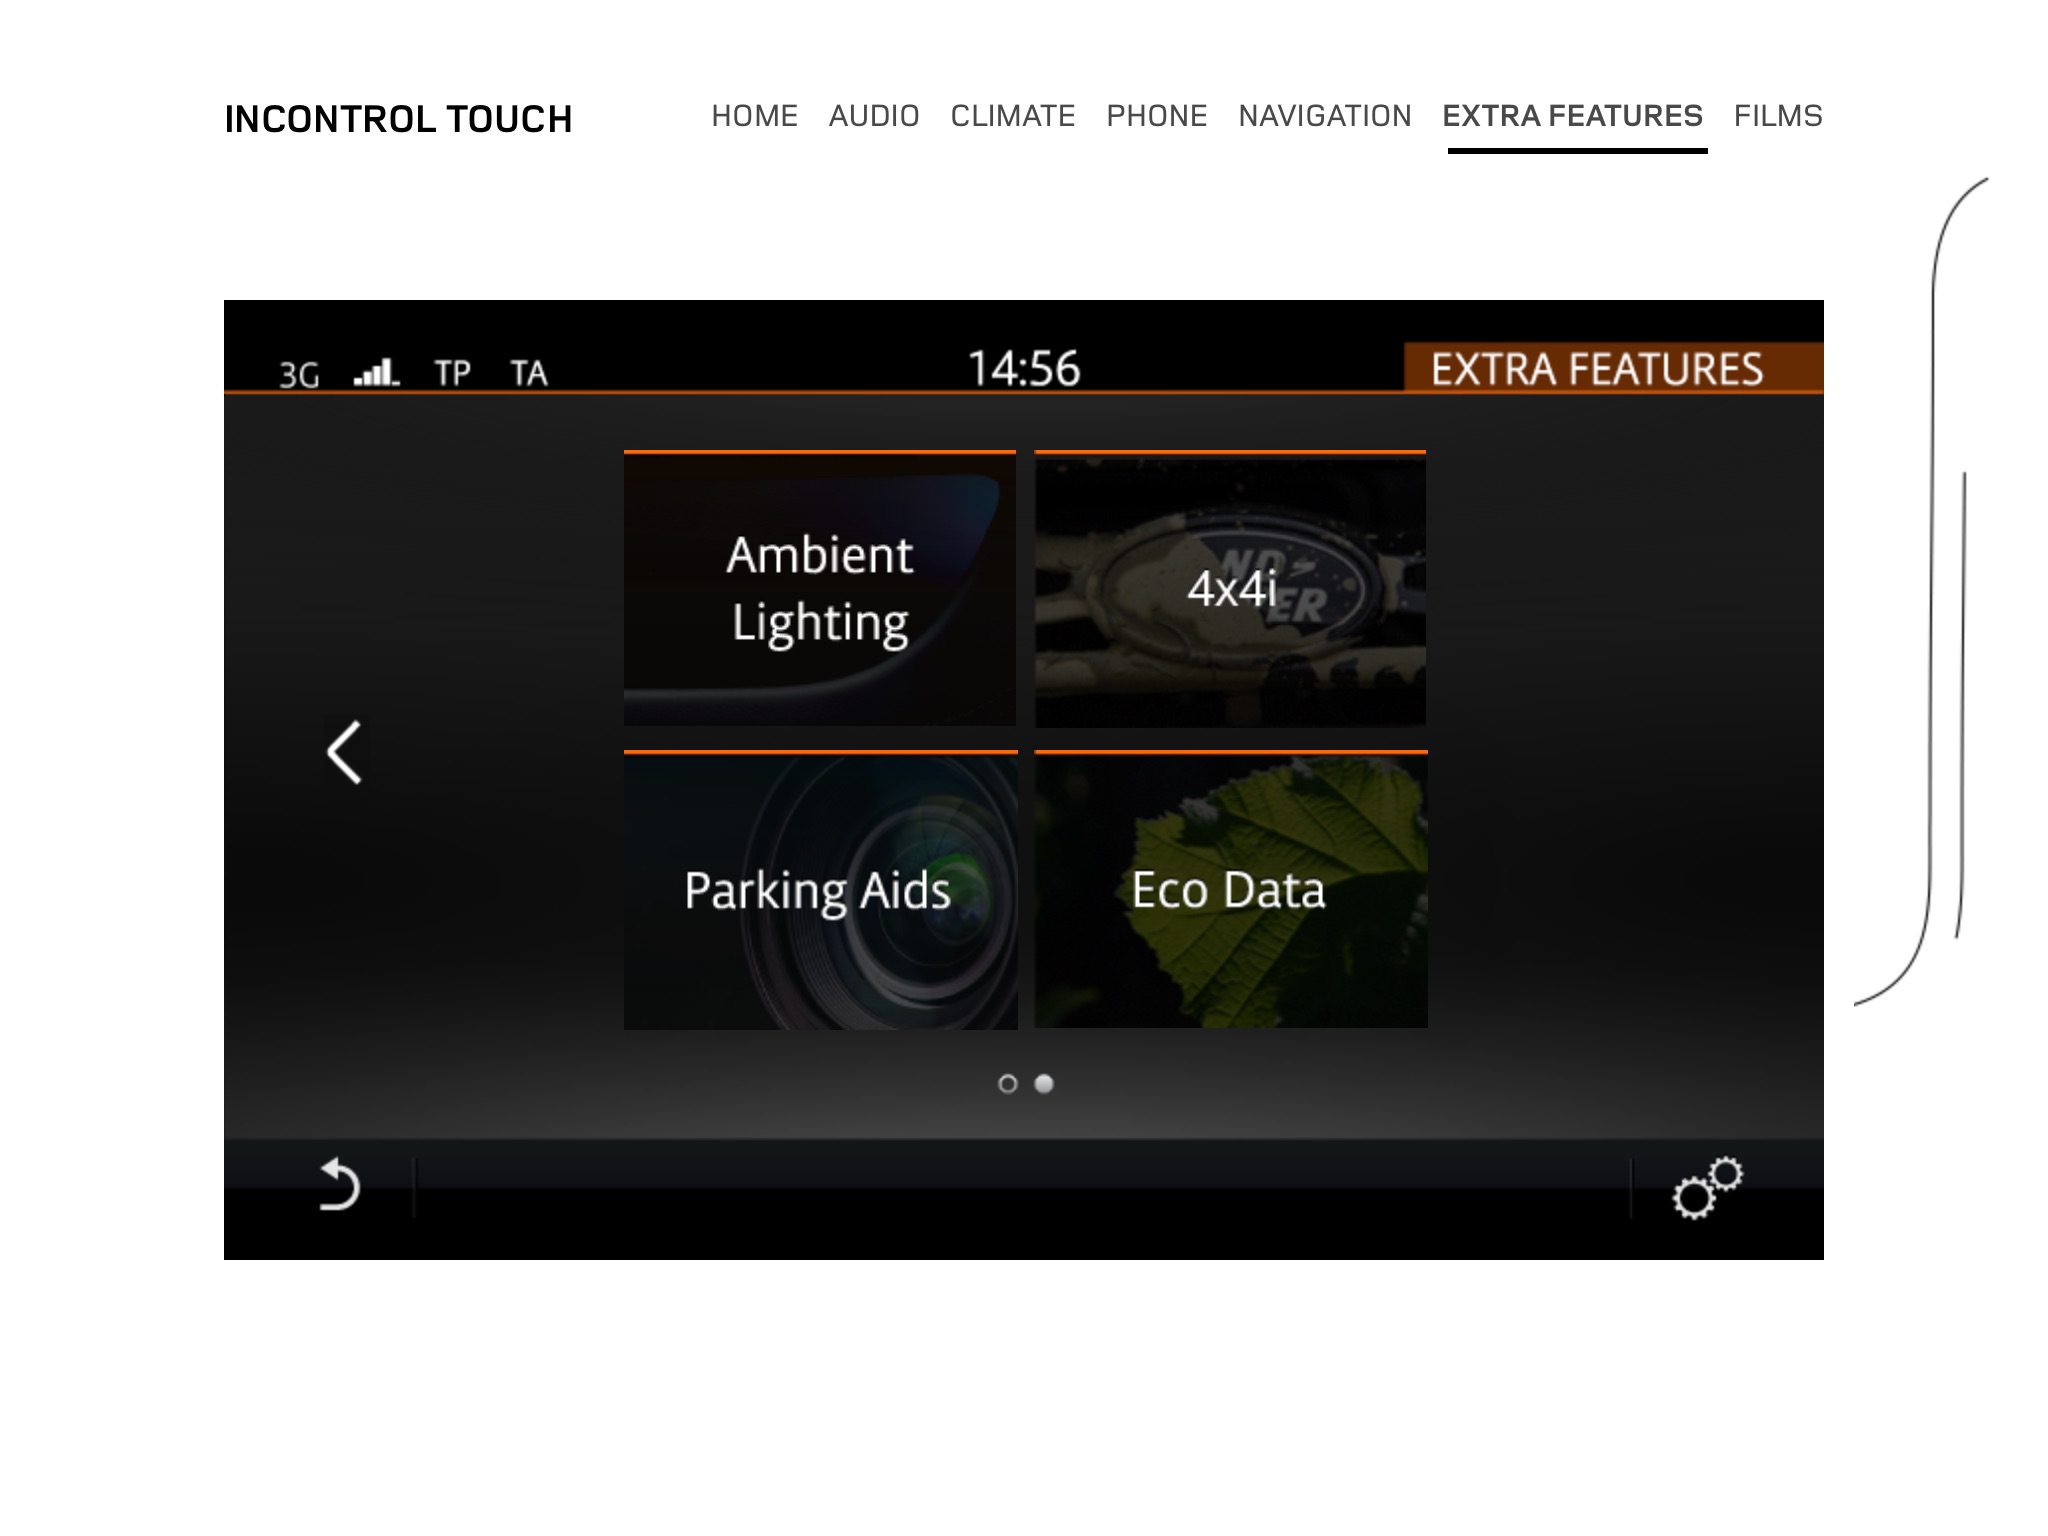 Land Rover InControl Touch Tour screenshot 2